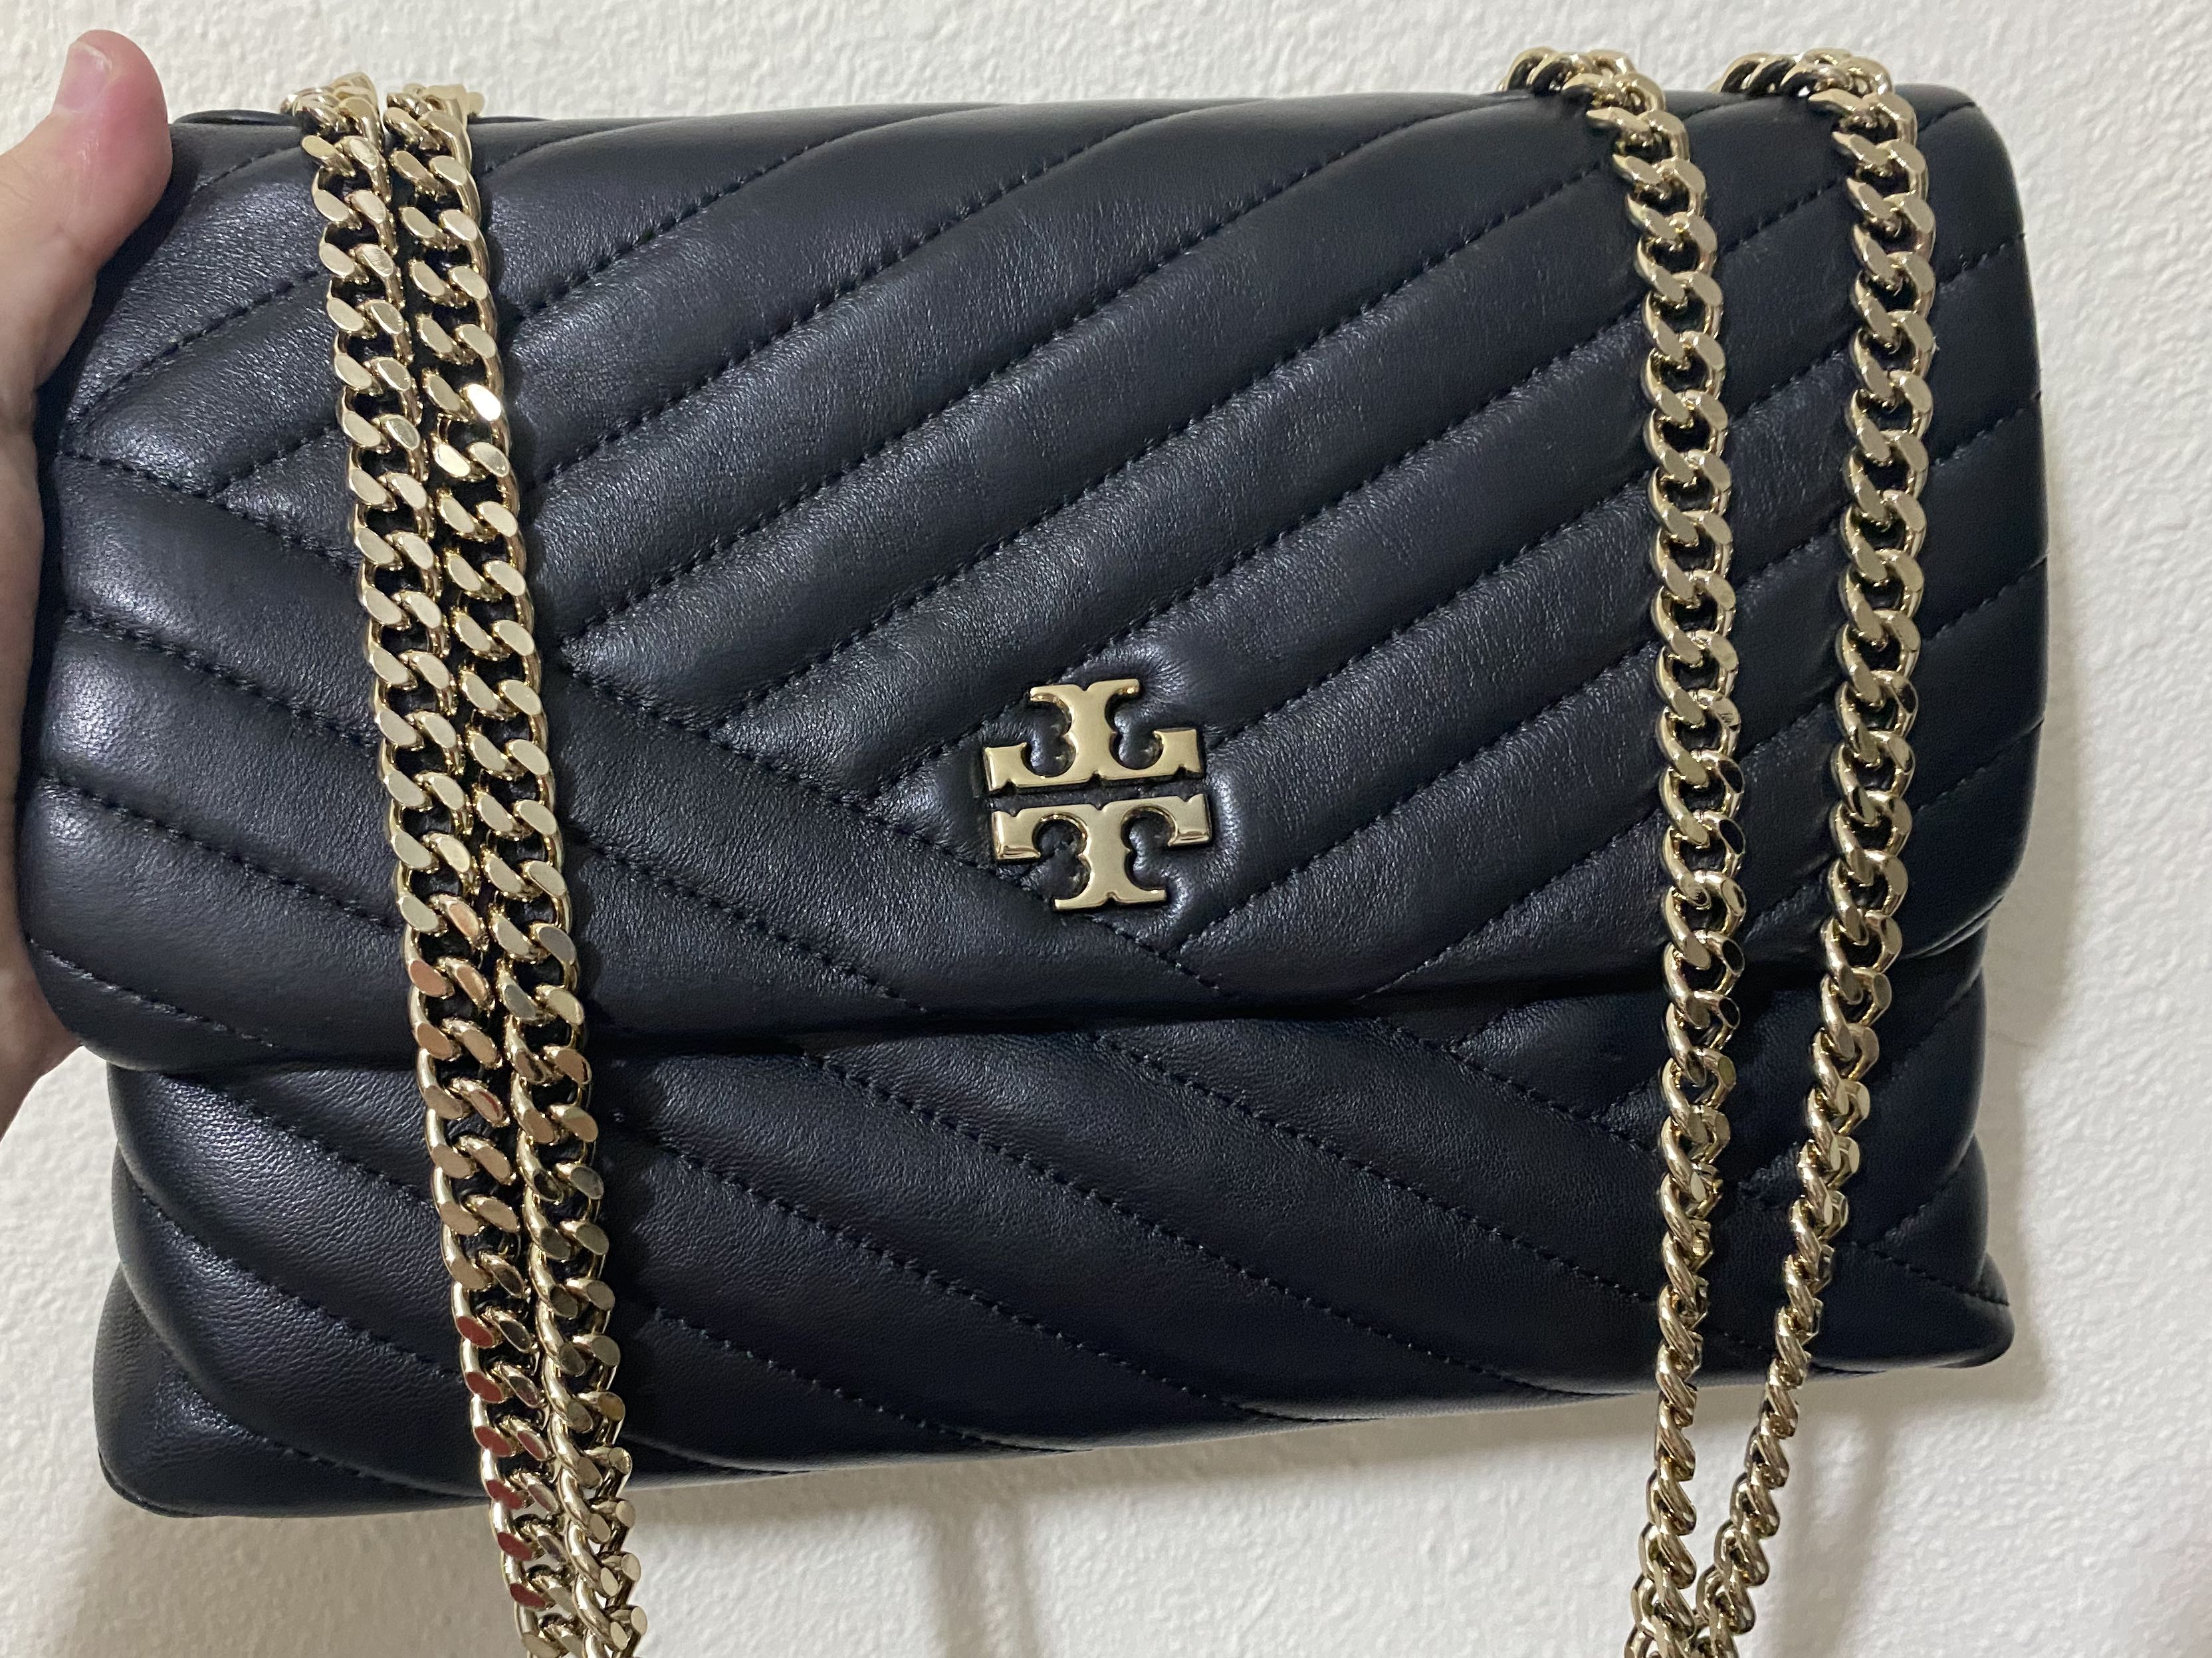 📌 ON HAND: Tory Burch Kira Chevron Small Top Handle Bag in Black, Women's  Fashion, Bags & Wallets, Cross-body Bags on Carousell